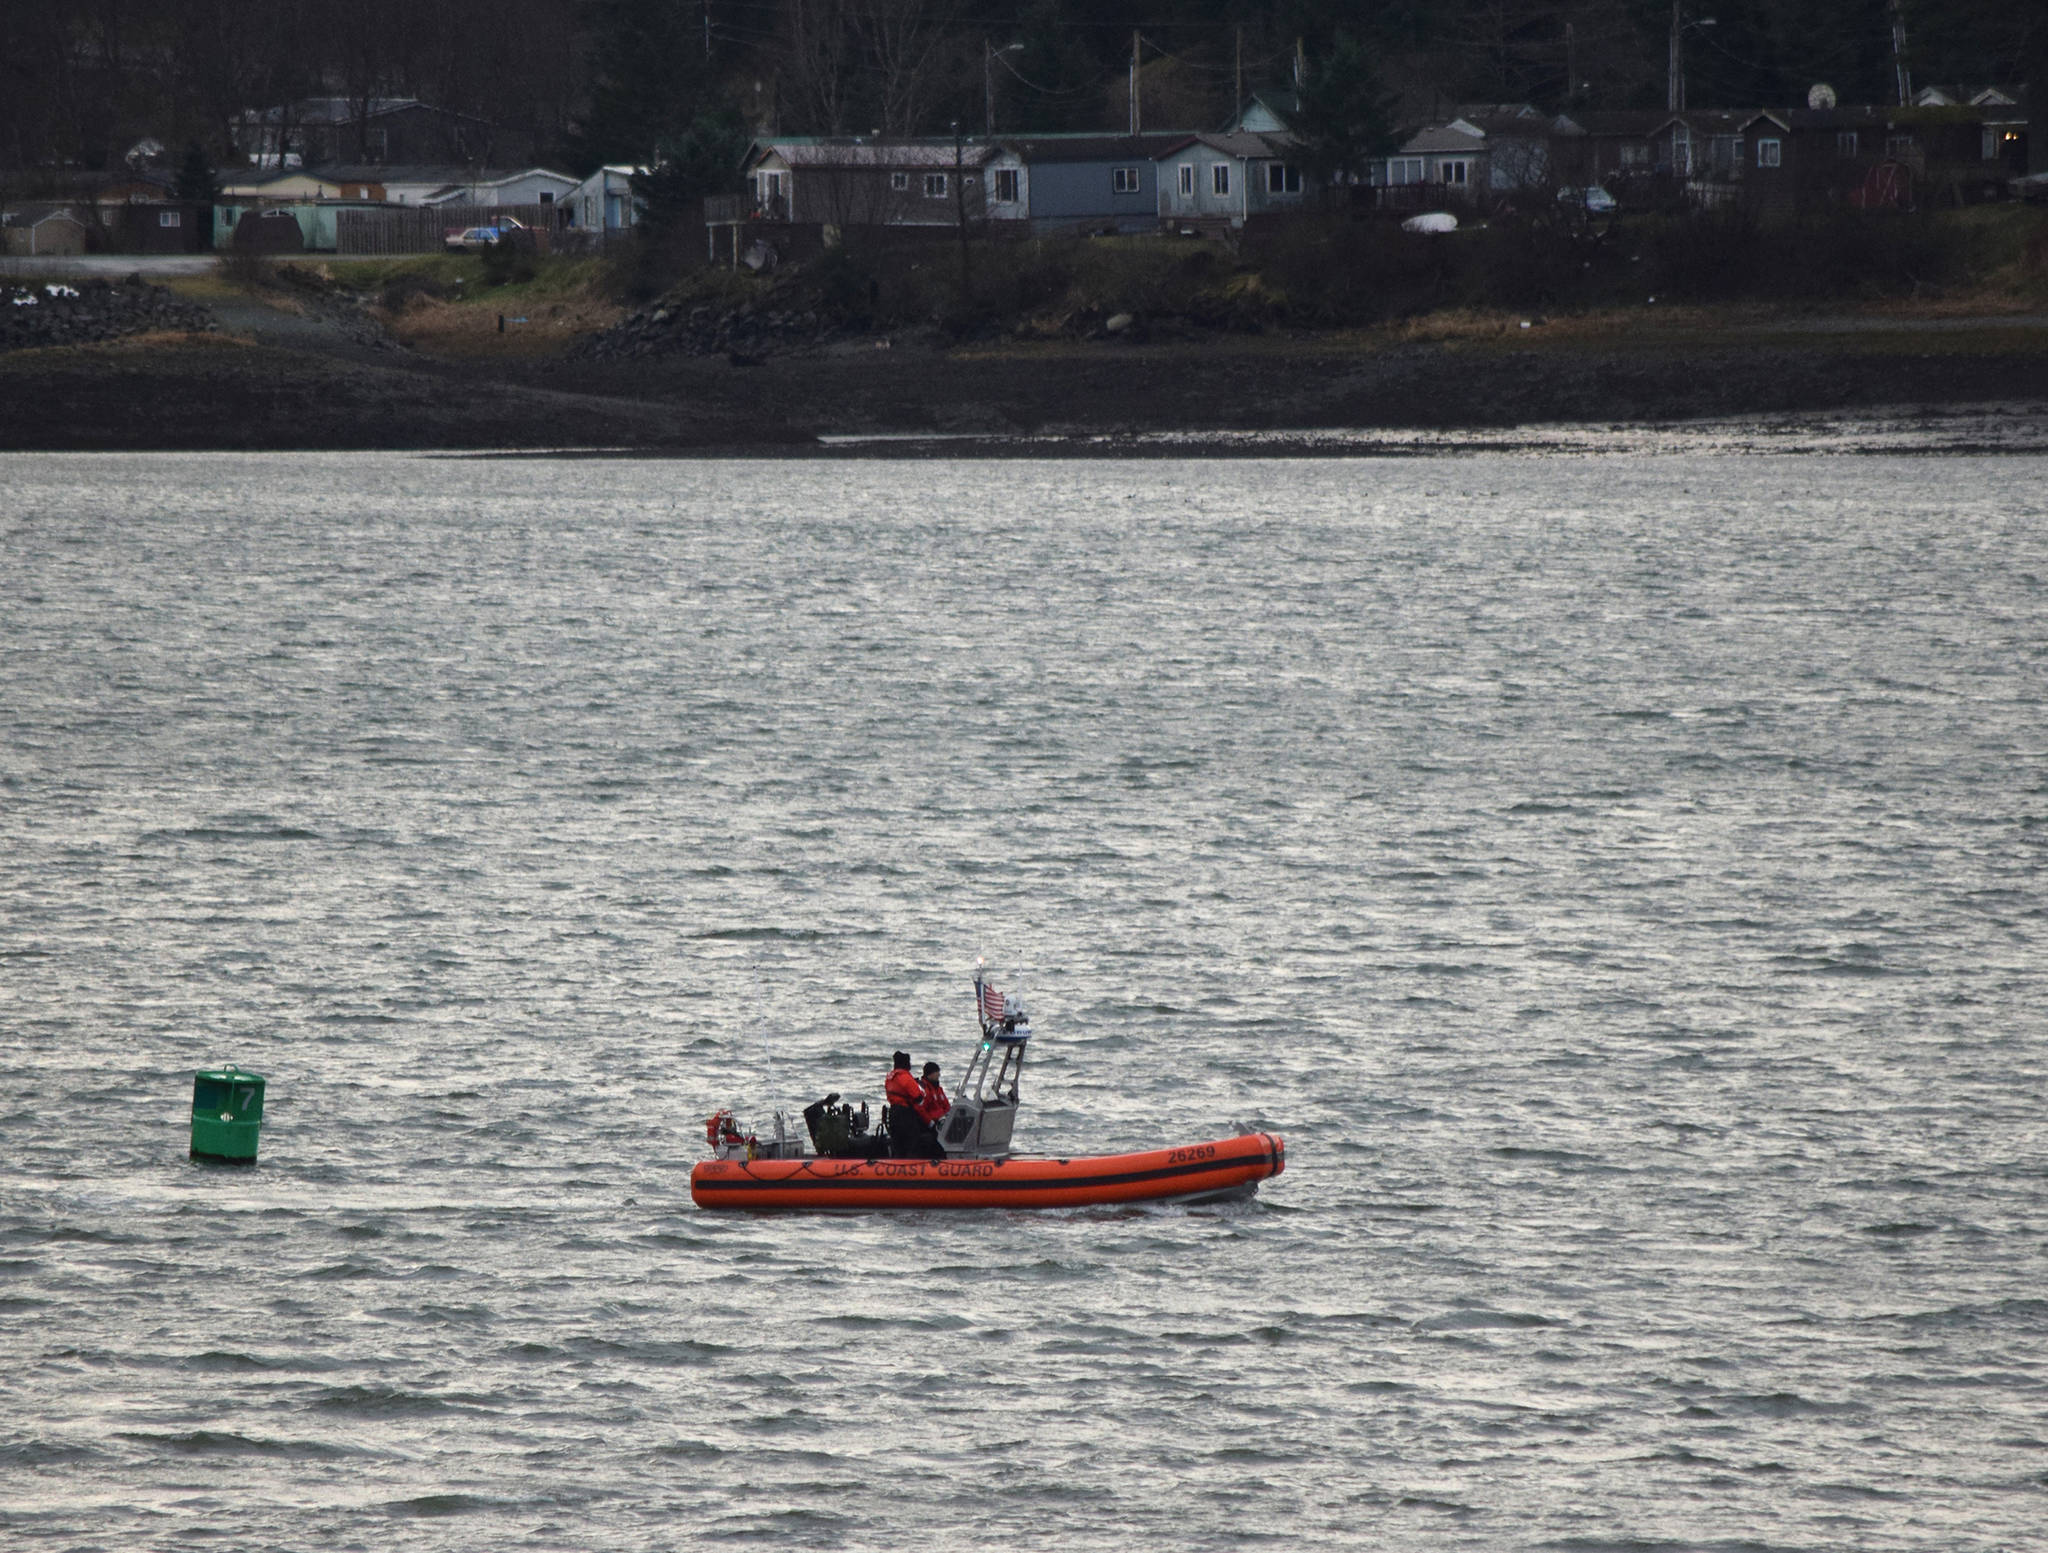 A Coast Guard boat searches Gastineau Channel for two missing boaters on Wednesday, Dec. 6, 2017. (Angelo Saggiomo | Juneau Empire)